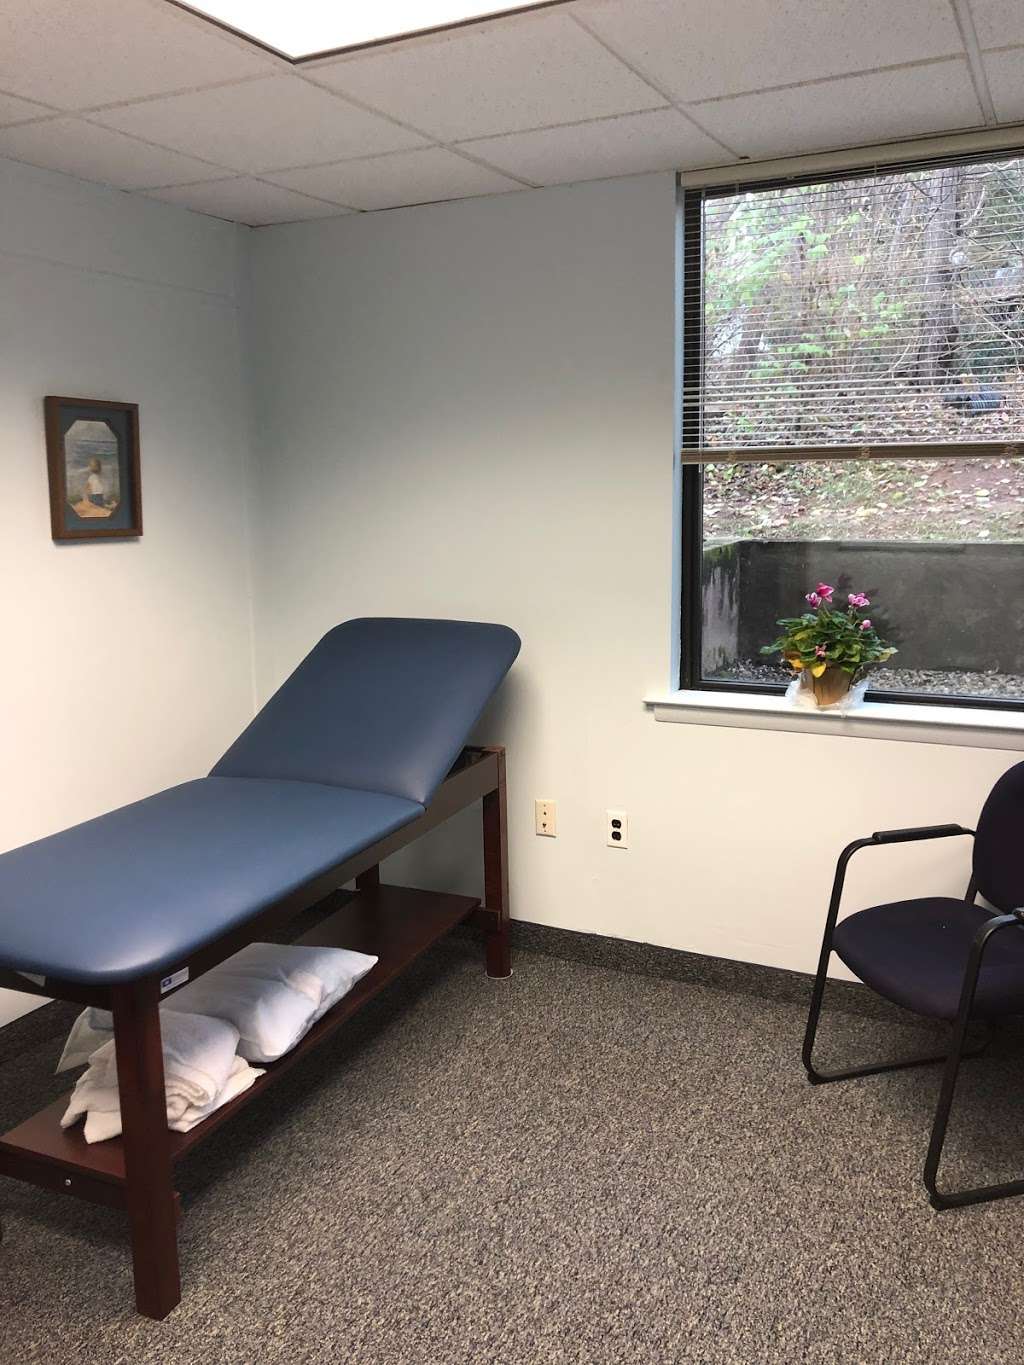 North Penn Physical Therapy | 1717 Swede Rd Ste 114, Blue Bell, PA 19422 | Phone: (215) 876-6933